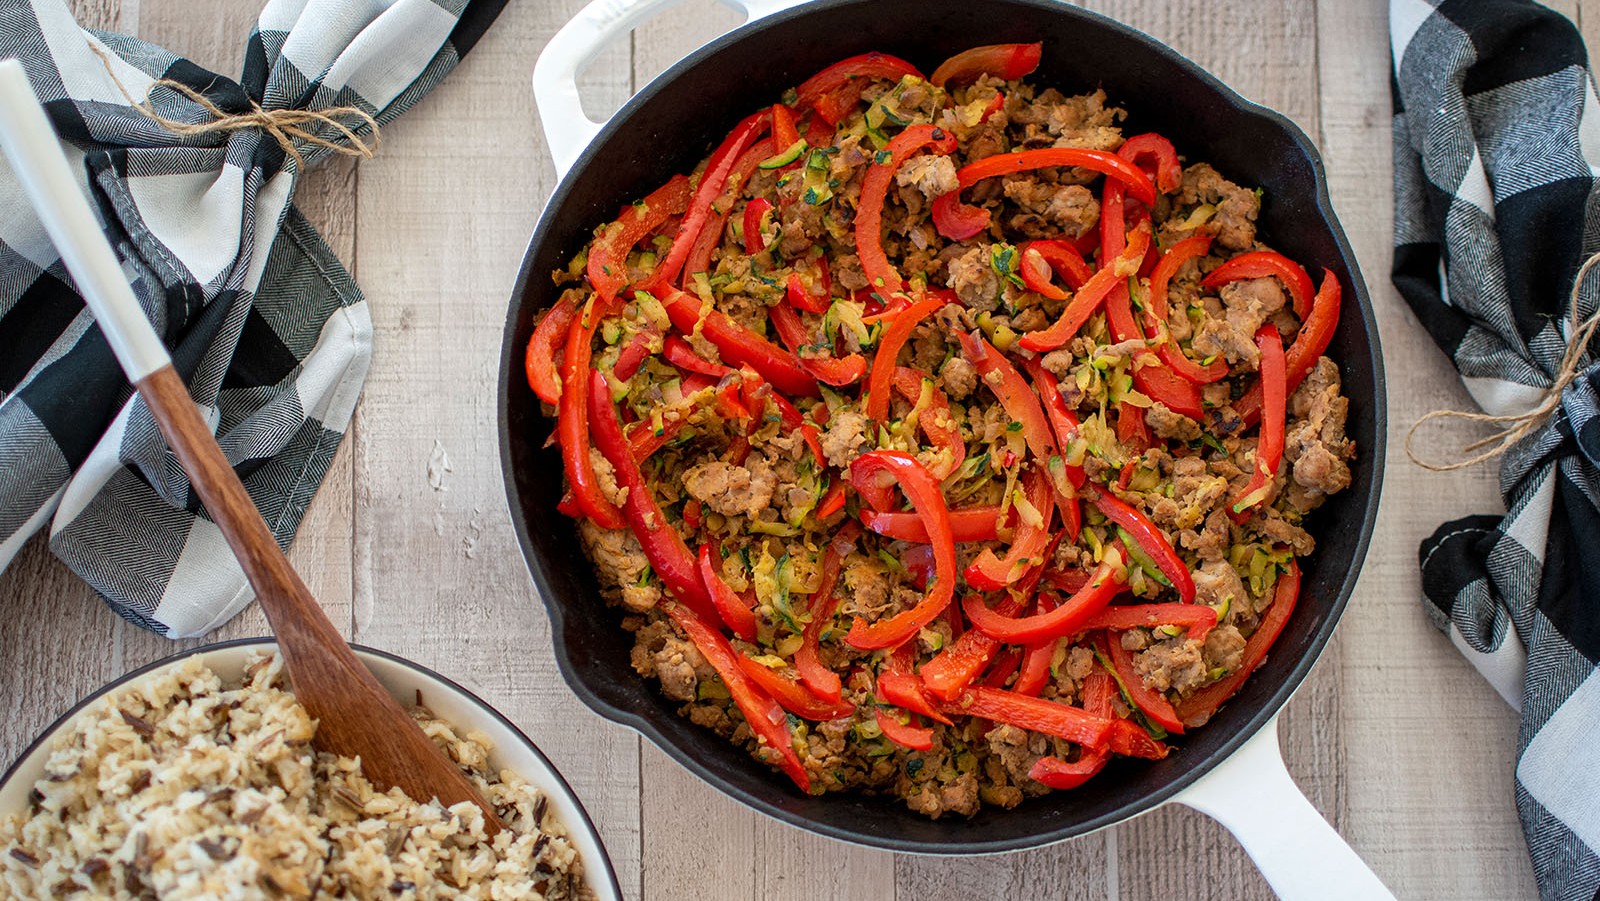 Image of Turkey Zucchini Red Pepper Skillet